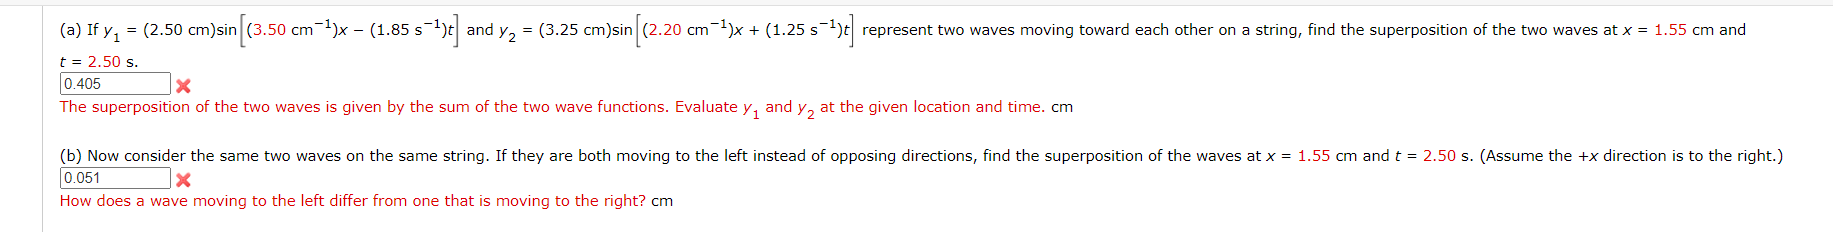 (a) If y, = (2.50 cm)sin (3.50 cm-)x - (1.85 s-1)t| and y, = (3.25 cm)sin (2.20 cm-1)x + (1.25 s-1;
represent two waves moving toward each other on a string, find the superposition of the two waves at x = 1.55 cm and
t = 2.50 s.
0.405
The superposition of the two waves is given by the sum of the two wave functions. Evaluate y, and y, at the given location and time. cm
(b) Now consider the same two waves on the same string. If they are both moving to the left instead of opposing directions, find the superposition of the waves at x = 1.55 cm andt = 2.50 s. (Assume the +x direction is to the right.)
0.051
How does a wave moving to the left differ from one that is moving to the right? cm
